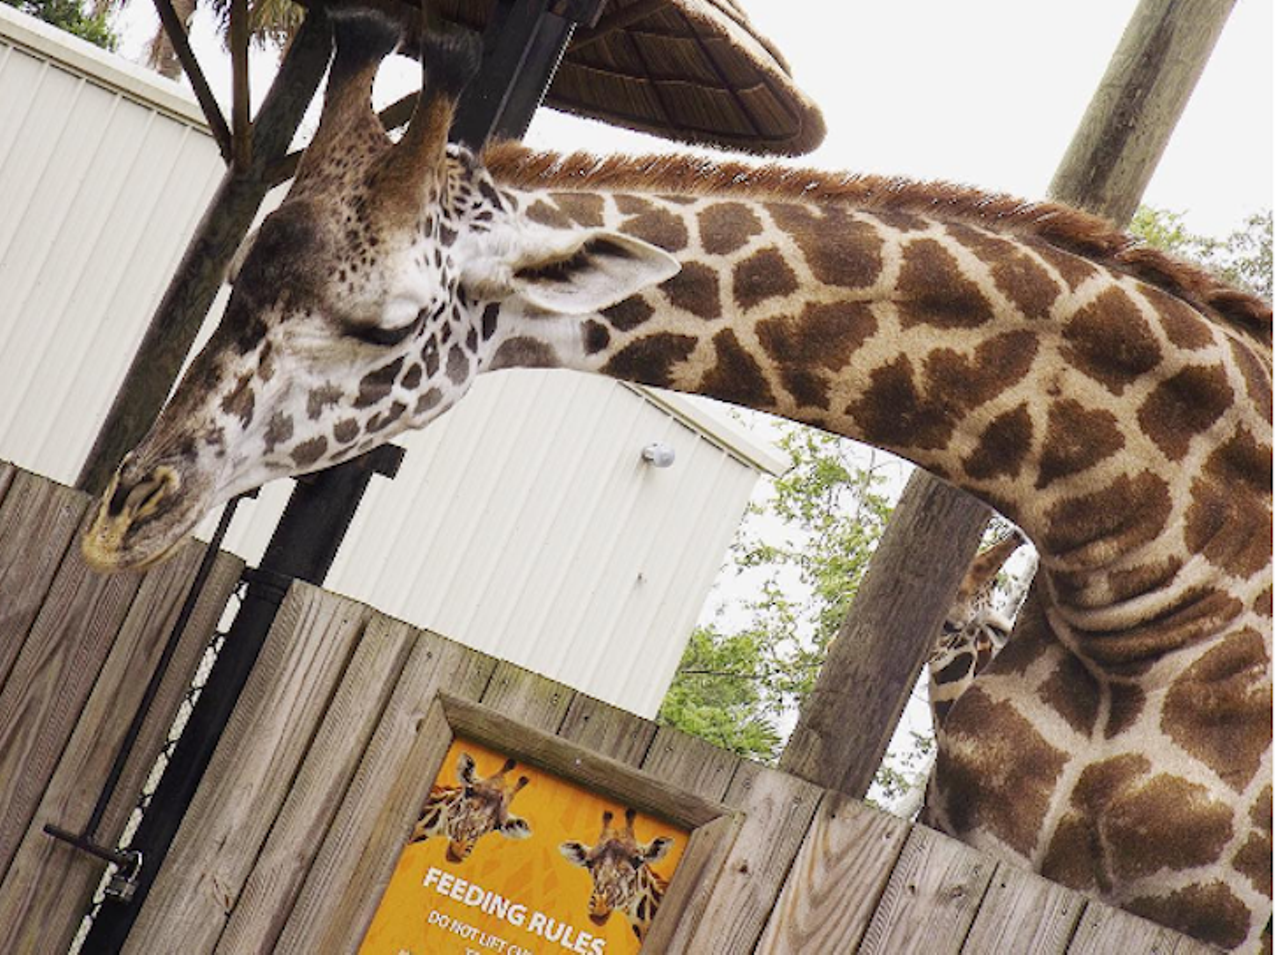 Feed the giraffes at the Central Florida Zoo
3755 U.S. 17, 407-323-4450
For $5, you can feed lettuce leaves to the long purple tongues of hungry giraffes. Feeding times are from 10 a.m. to 3 p.m daily. 
Photo via nedrubnayrin/Instagram